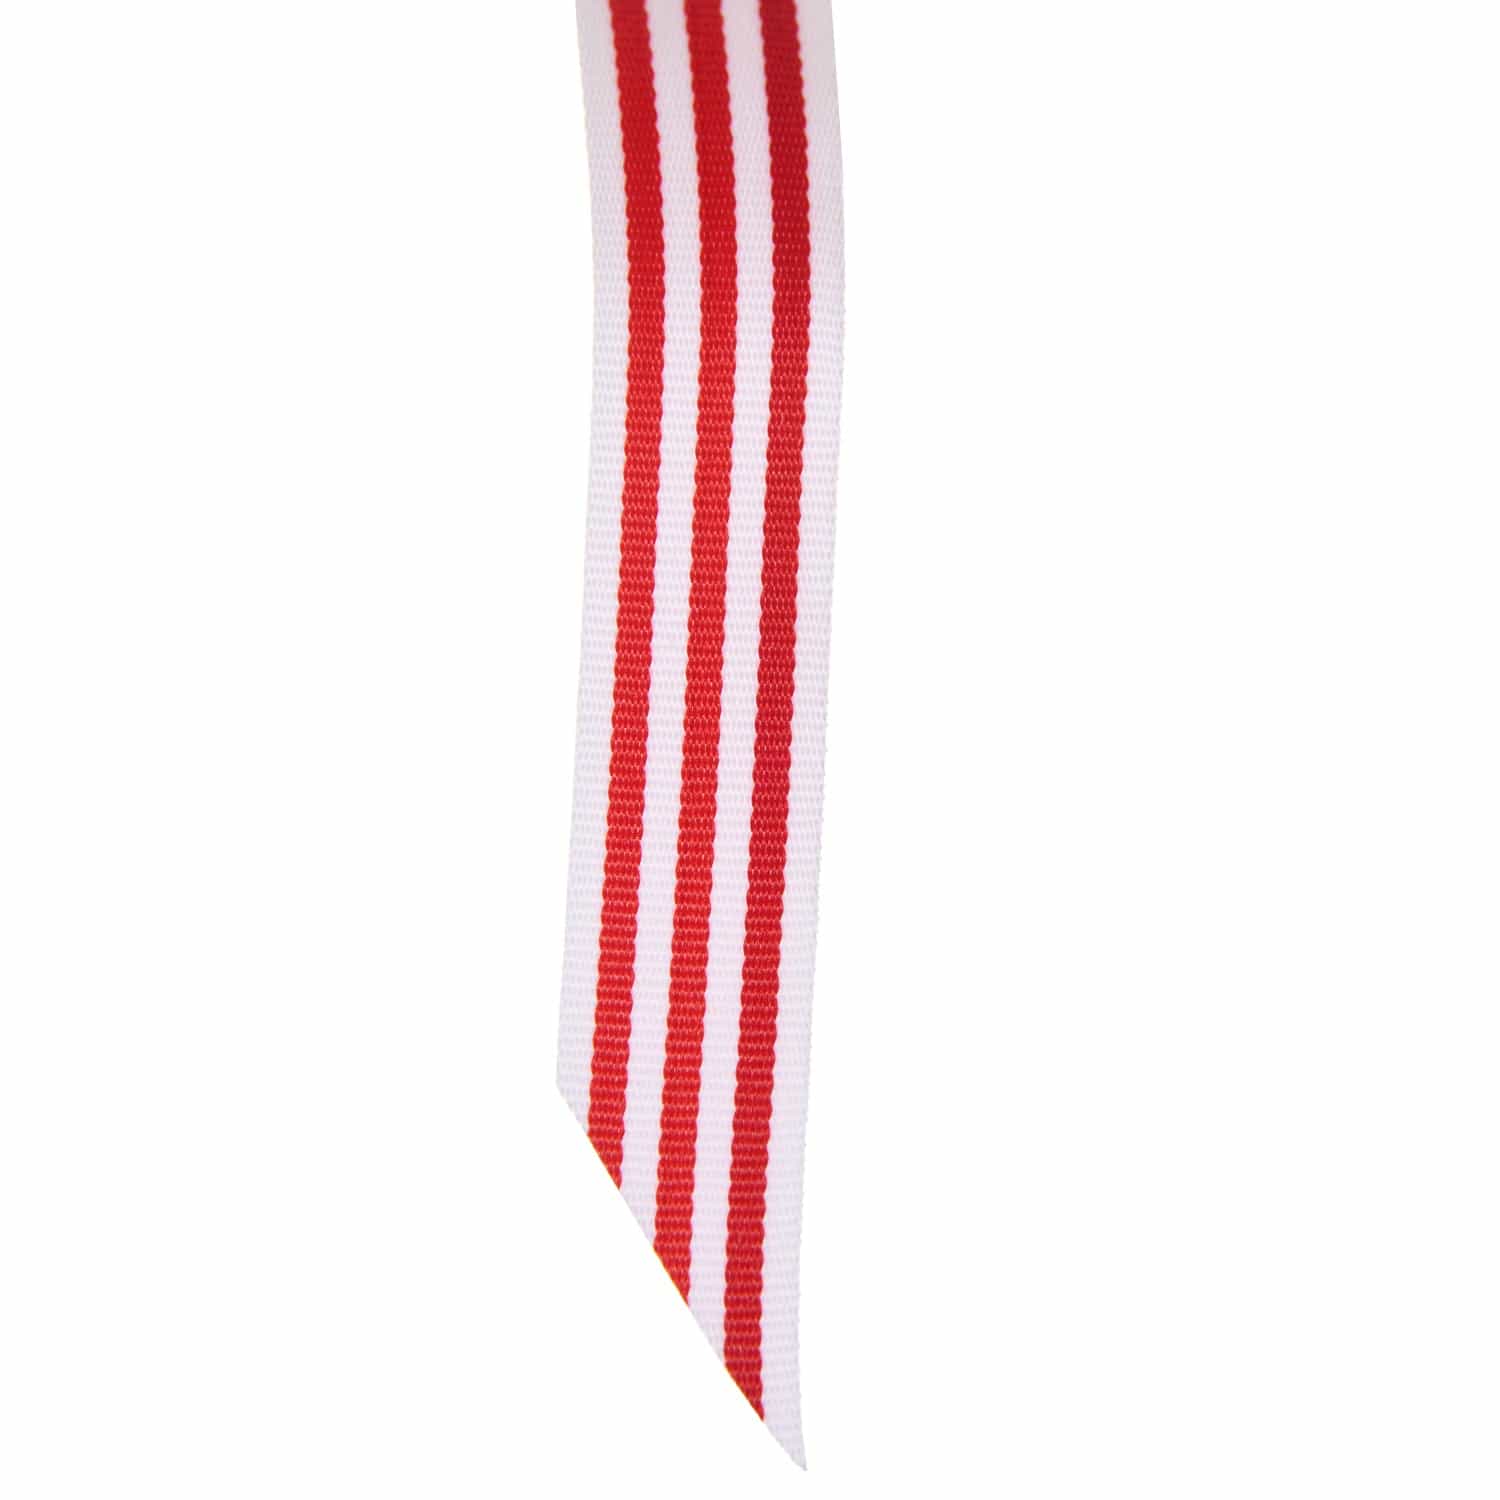 Red/White Ribbon 1/8” wide BY THE YARD